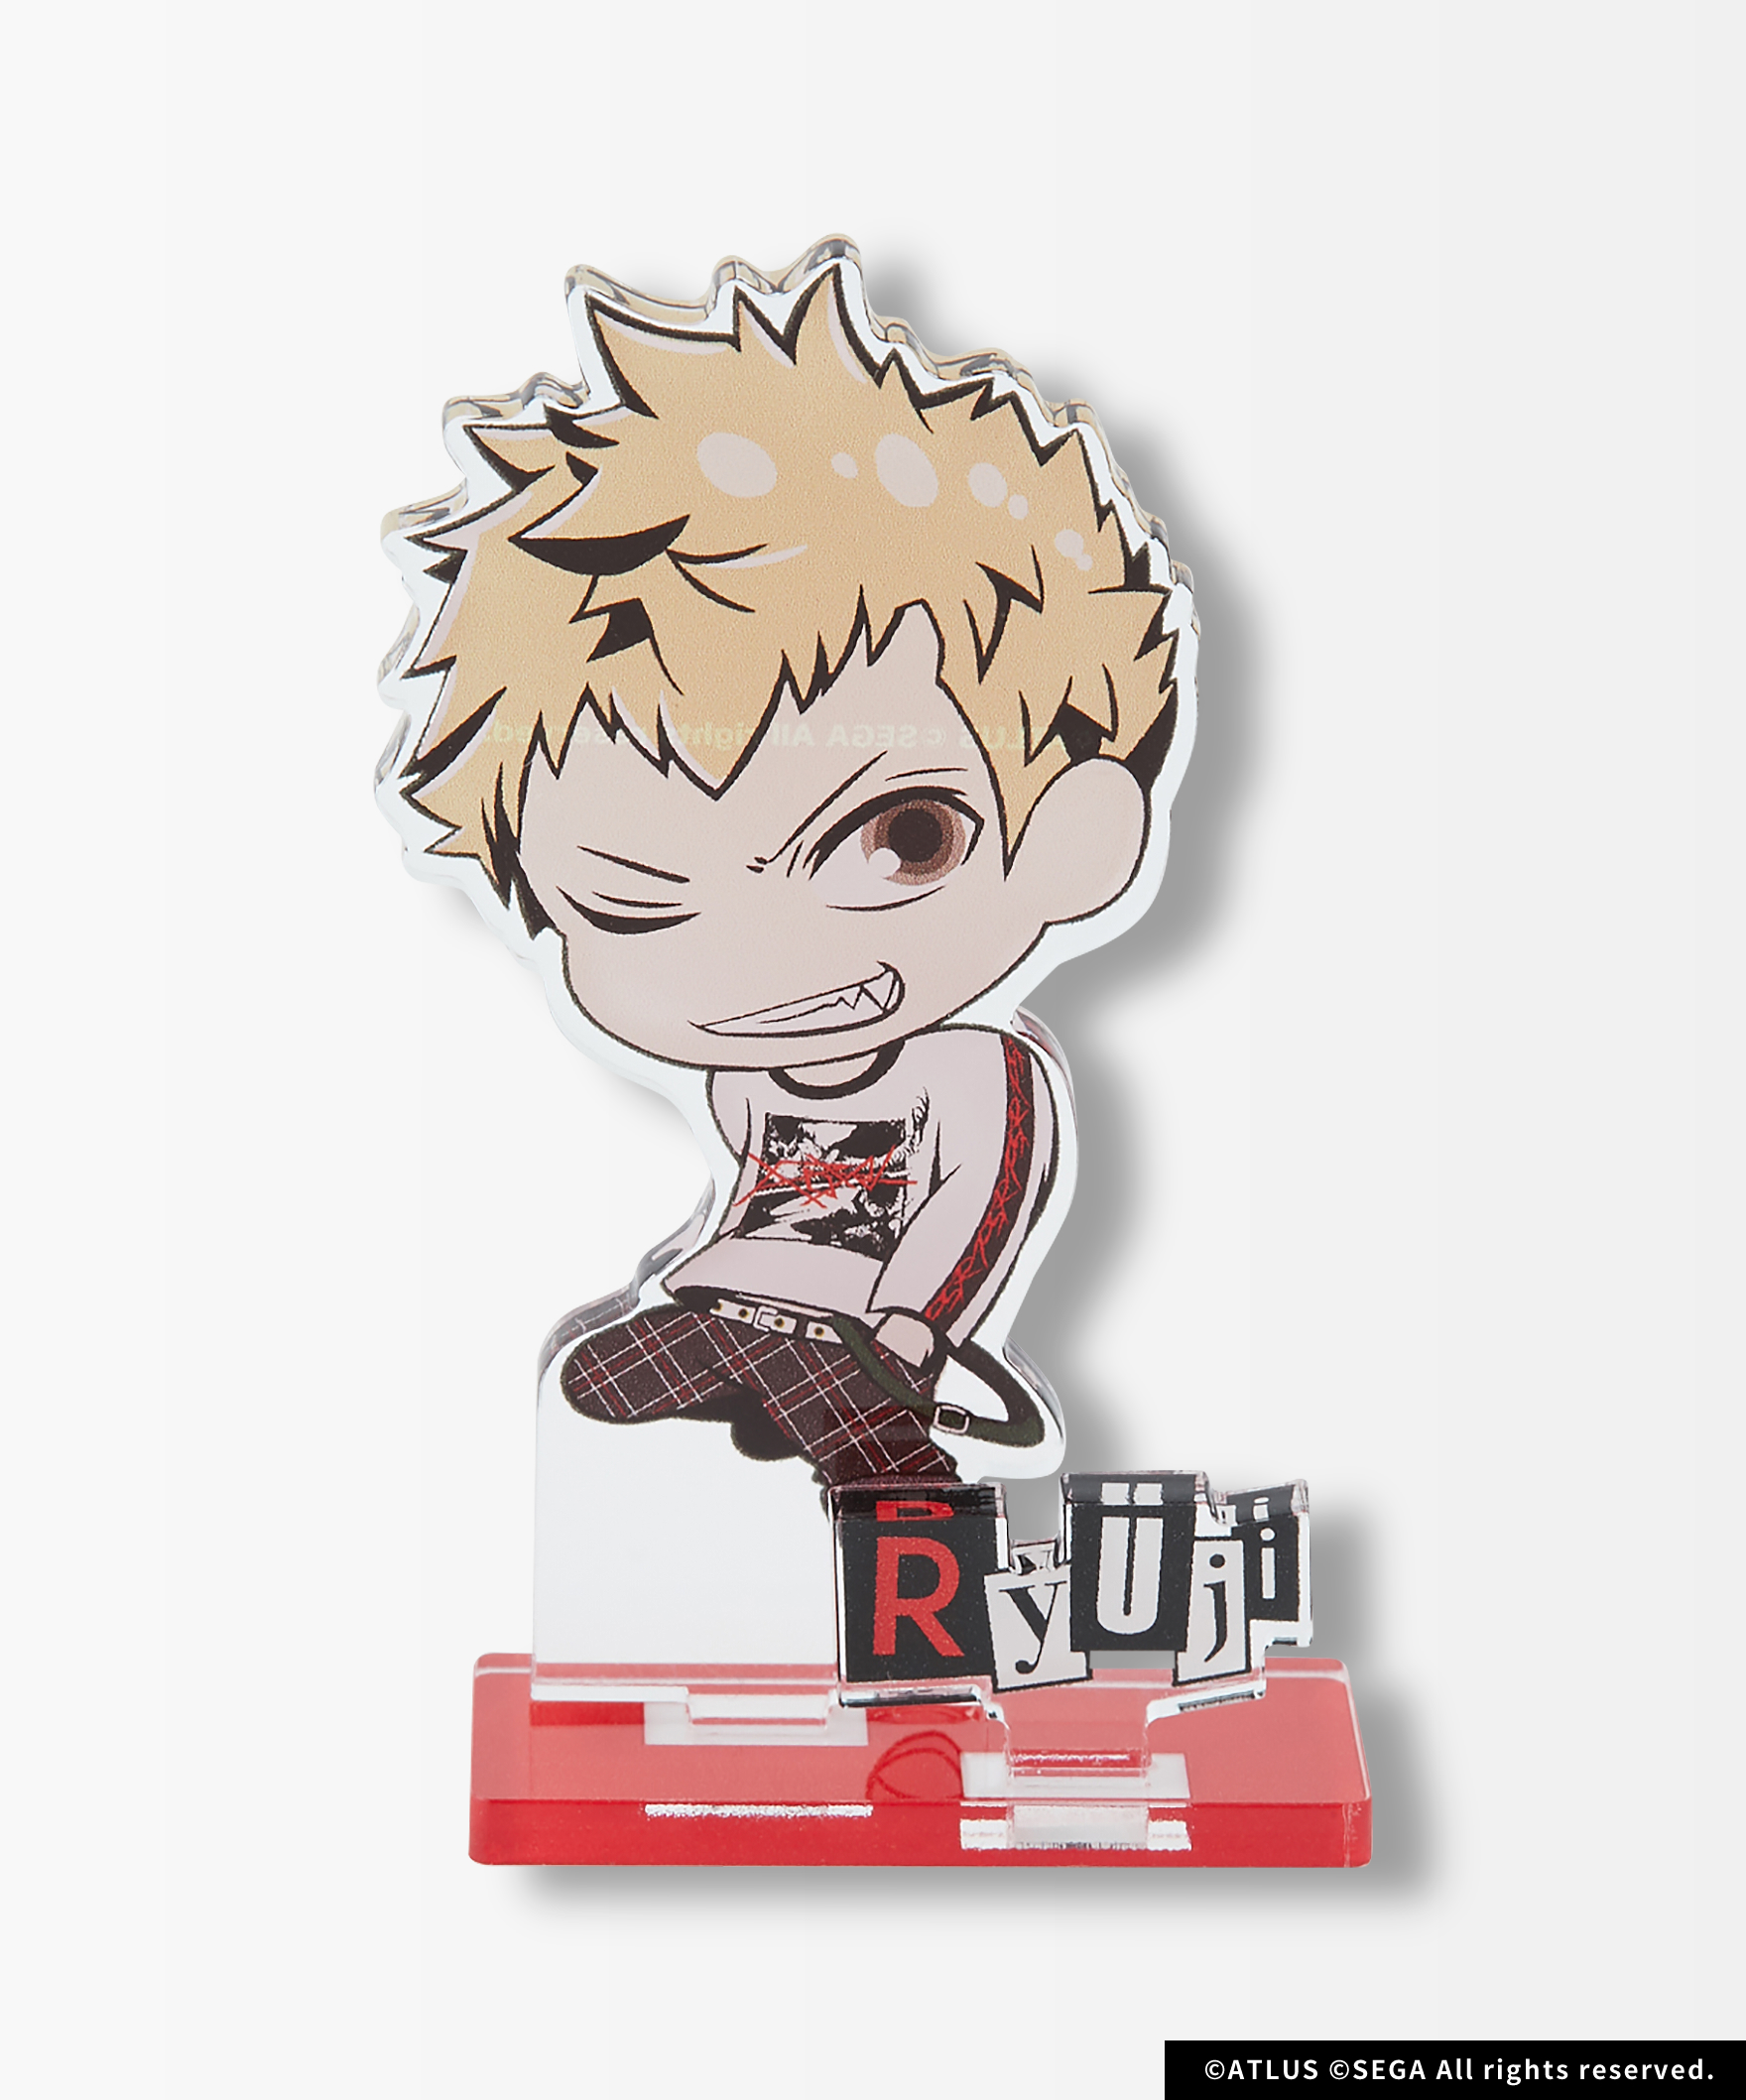 P5R SD Acrylic Stand